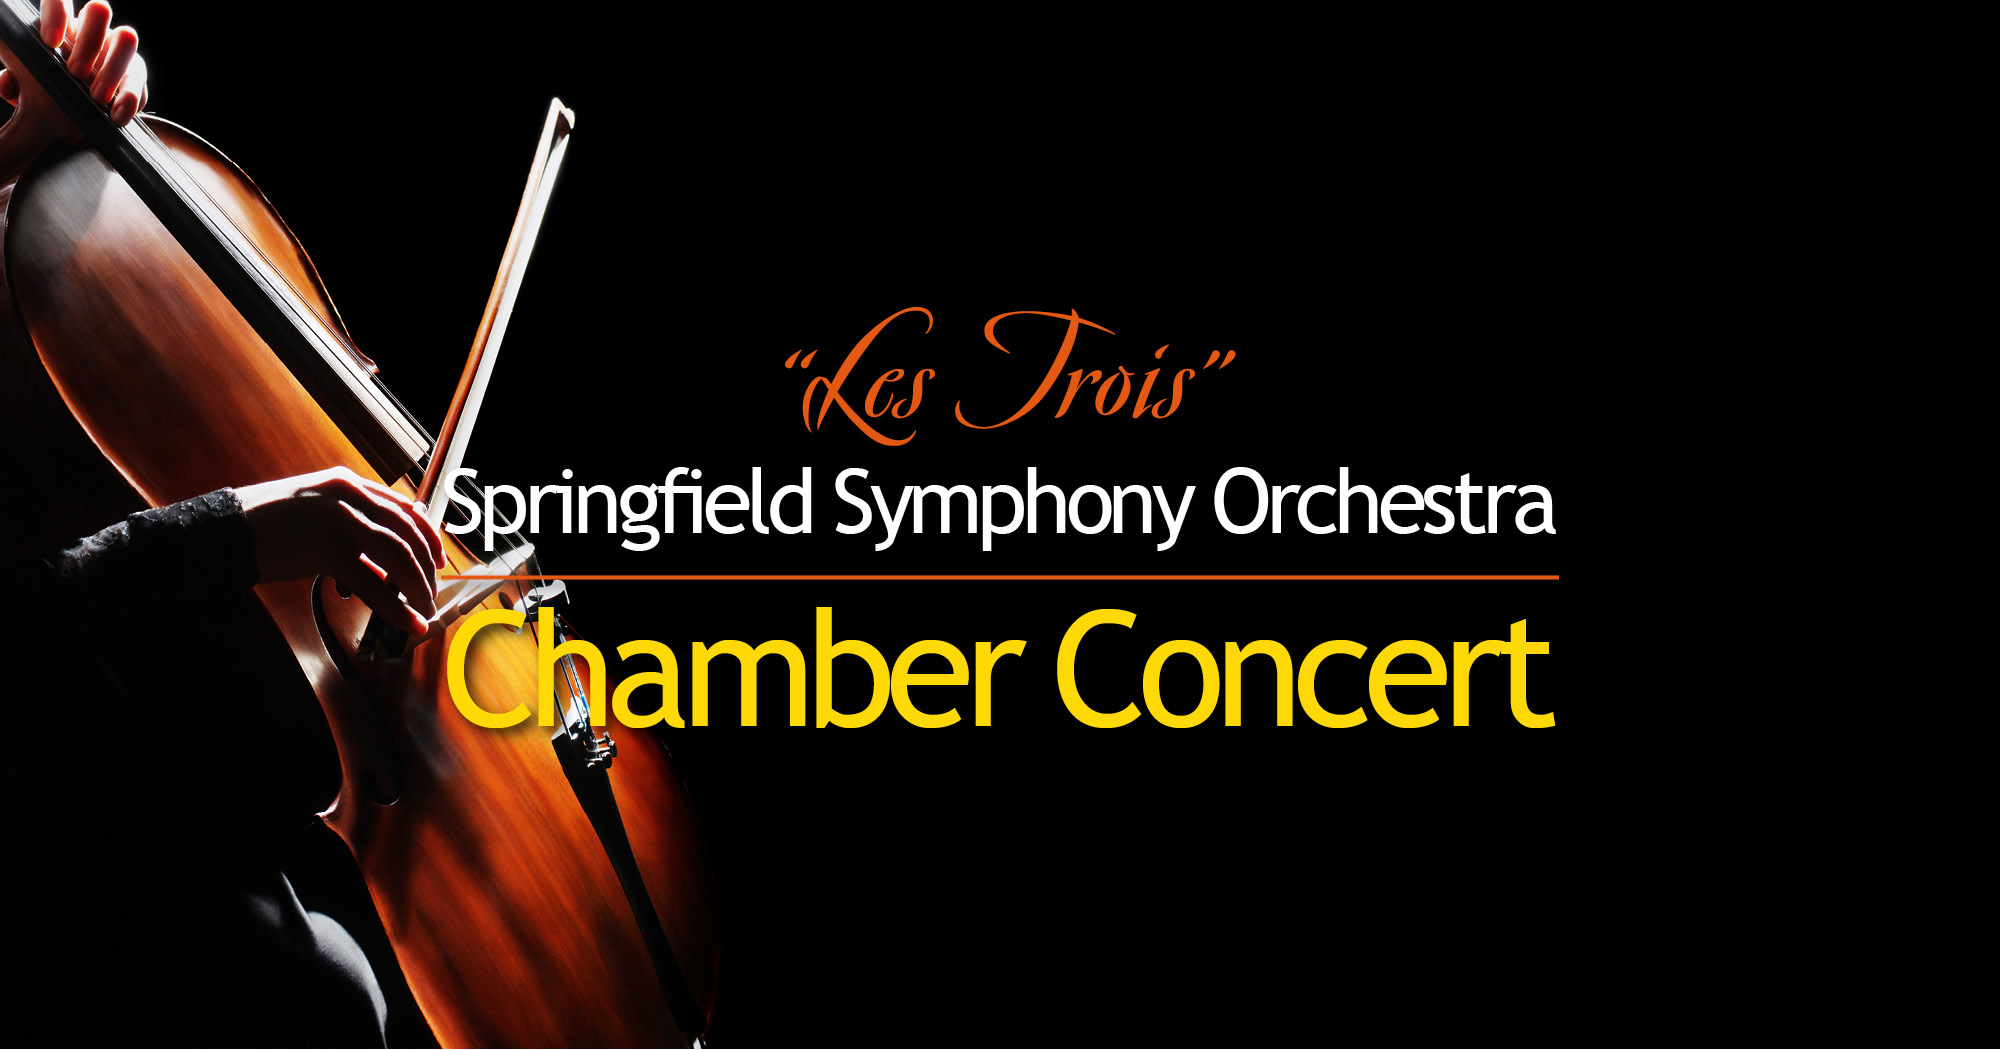 Hand playing cello with text reading "Springfield Symphony Orchestra Les Trois Chamber Concert"